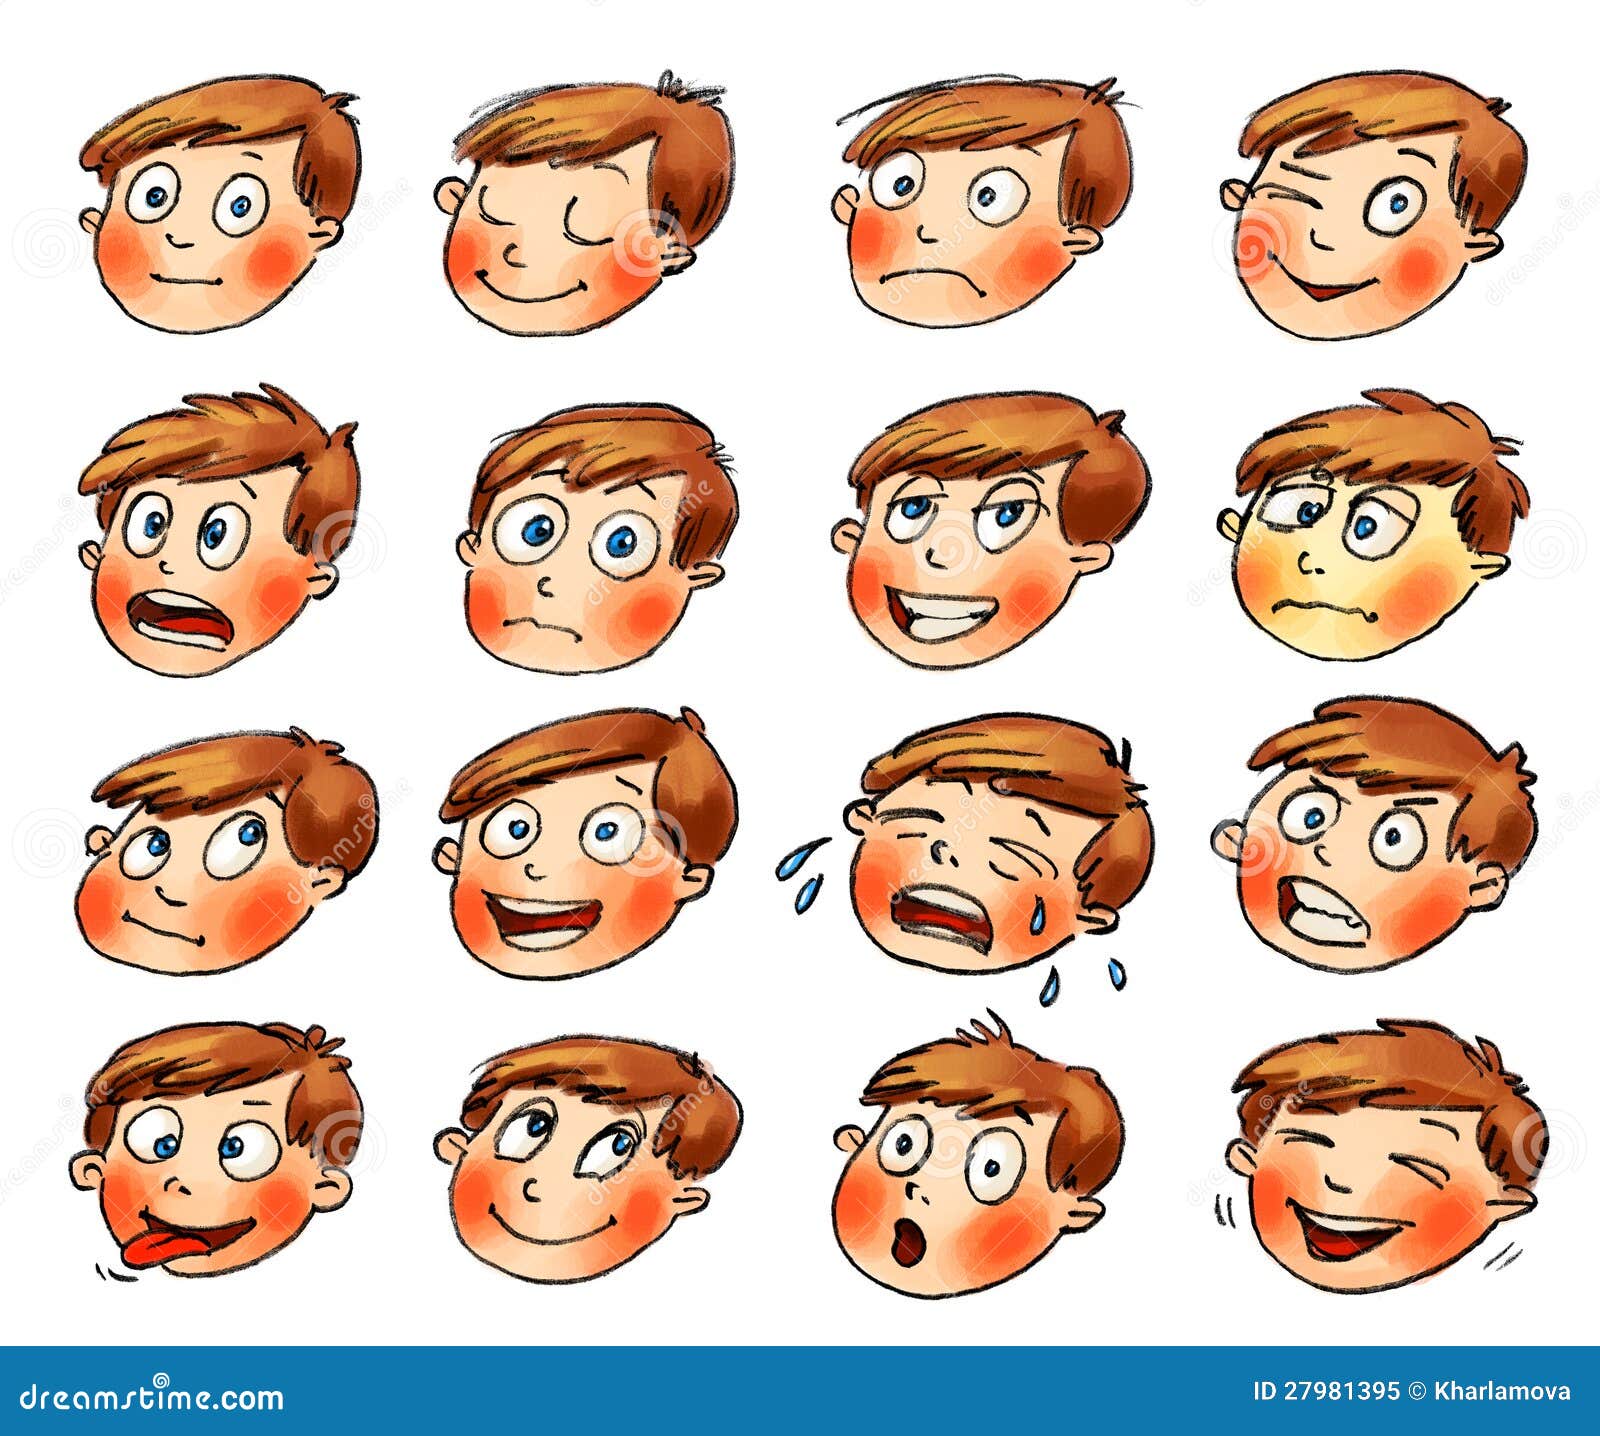 facial expressions clipart free downloads - photo #33